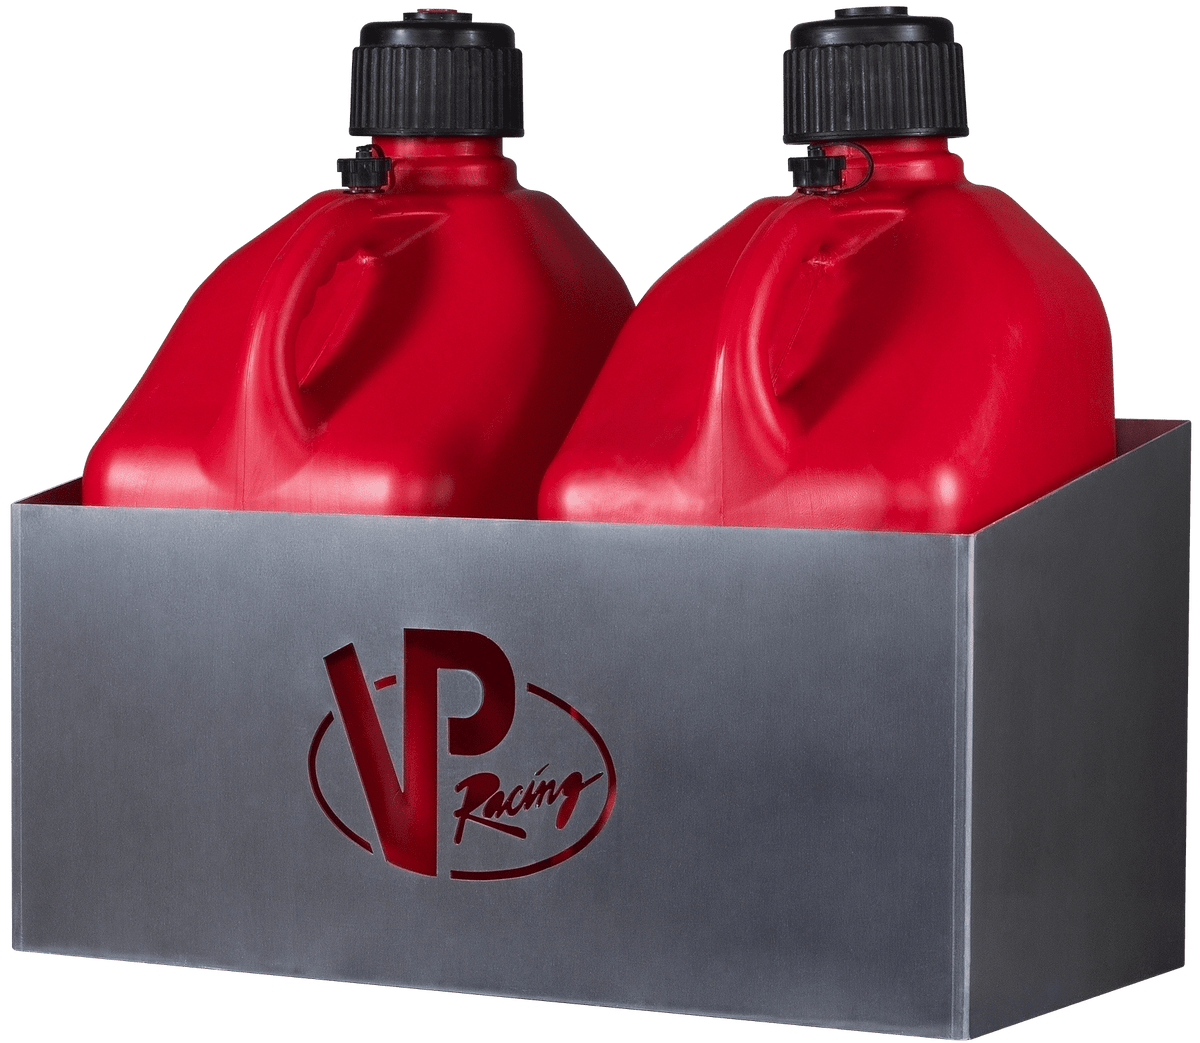 VP Racing Fuel 3943 5 gal U-Jug Red ; Plastic Product Formers 5 Gal. Square  Plastic Multi-Purpose Utility Jug Red Pack - Shelby, NC - Shelby Hardware &  Supply Company